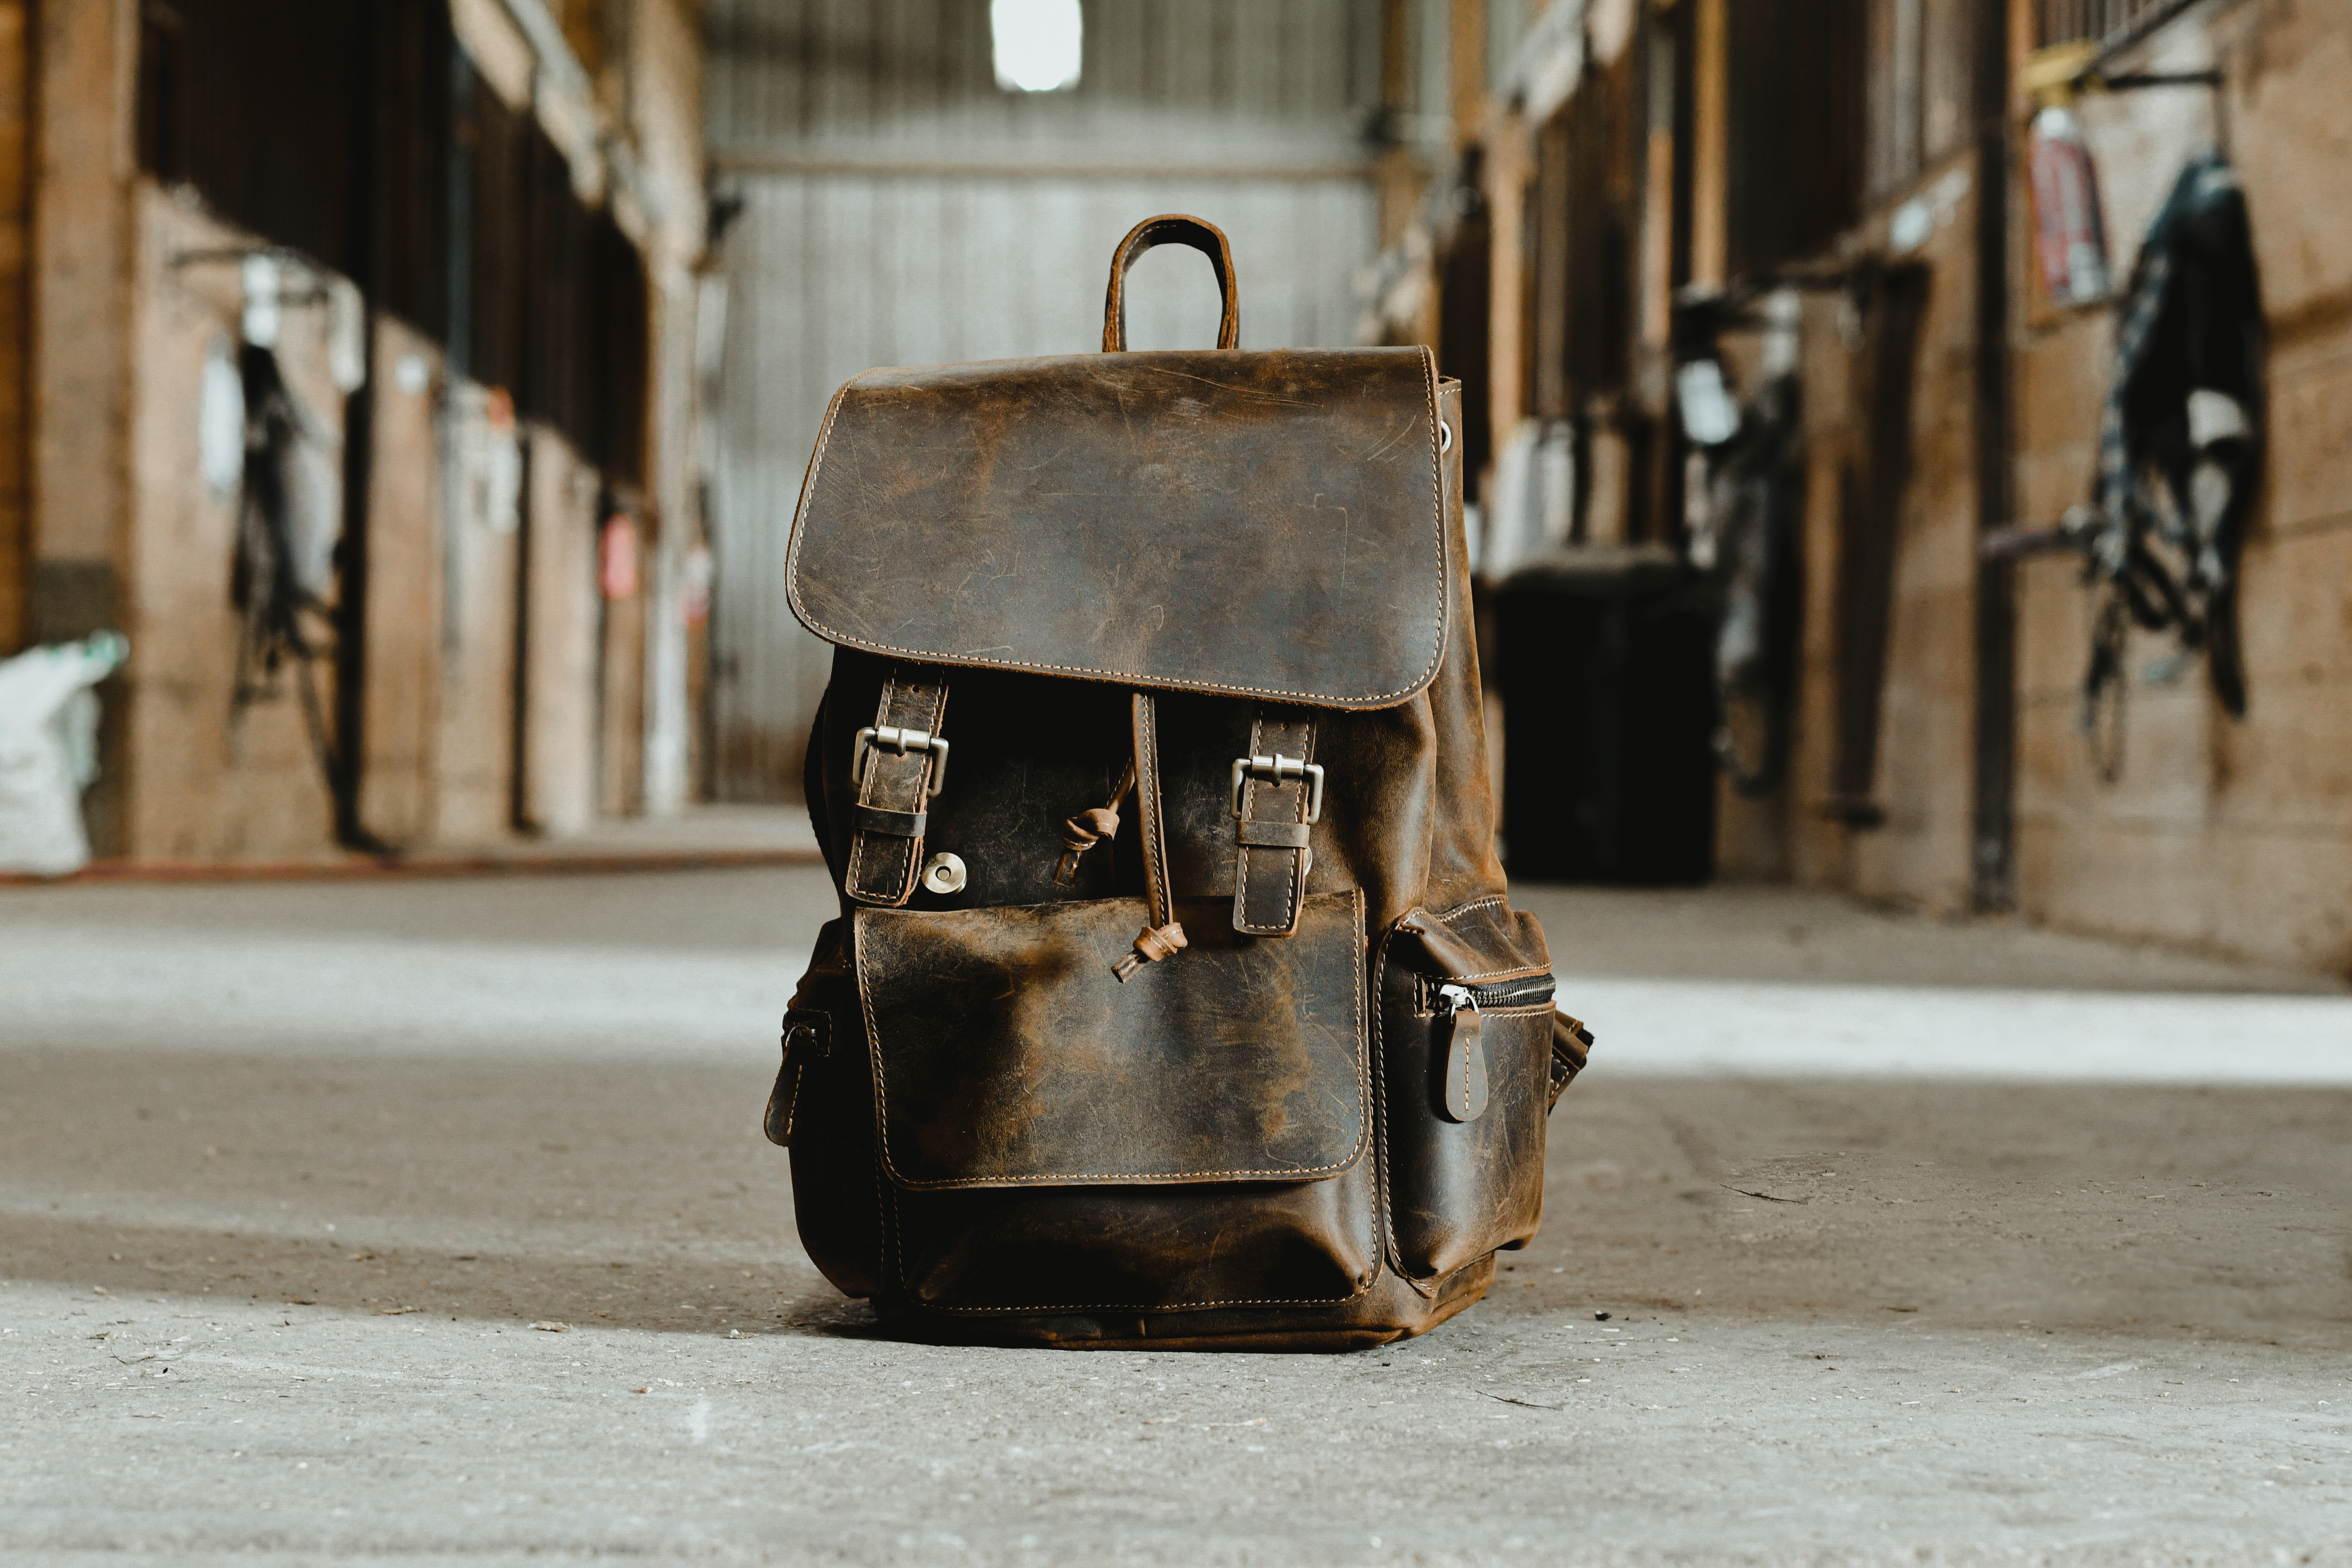 leather travel bag opening into two equal parts